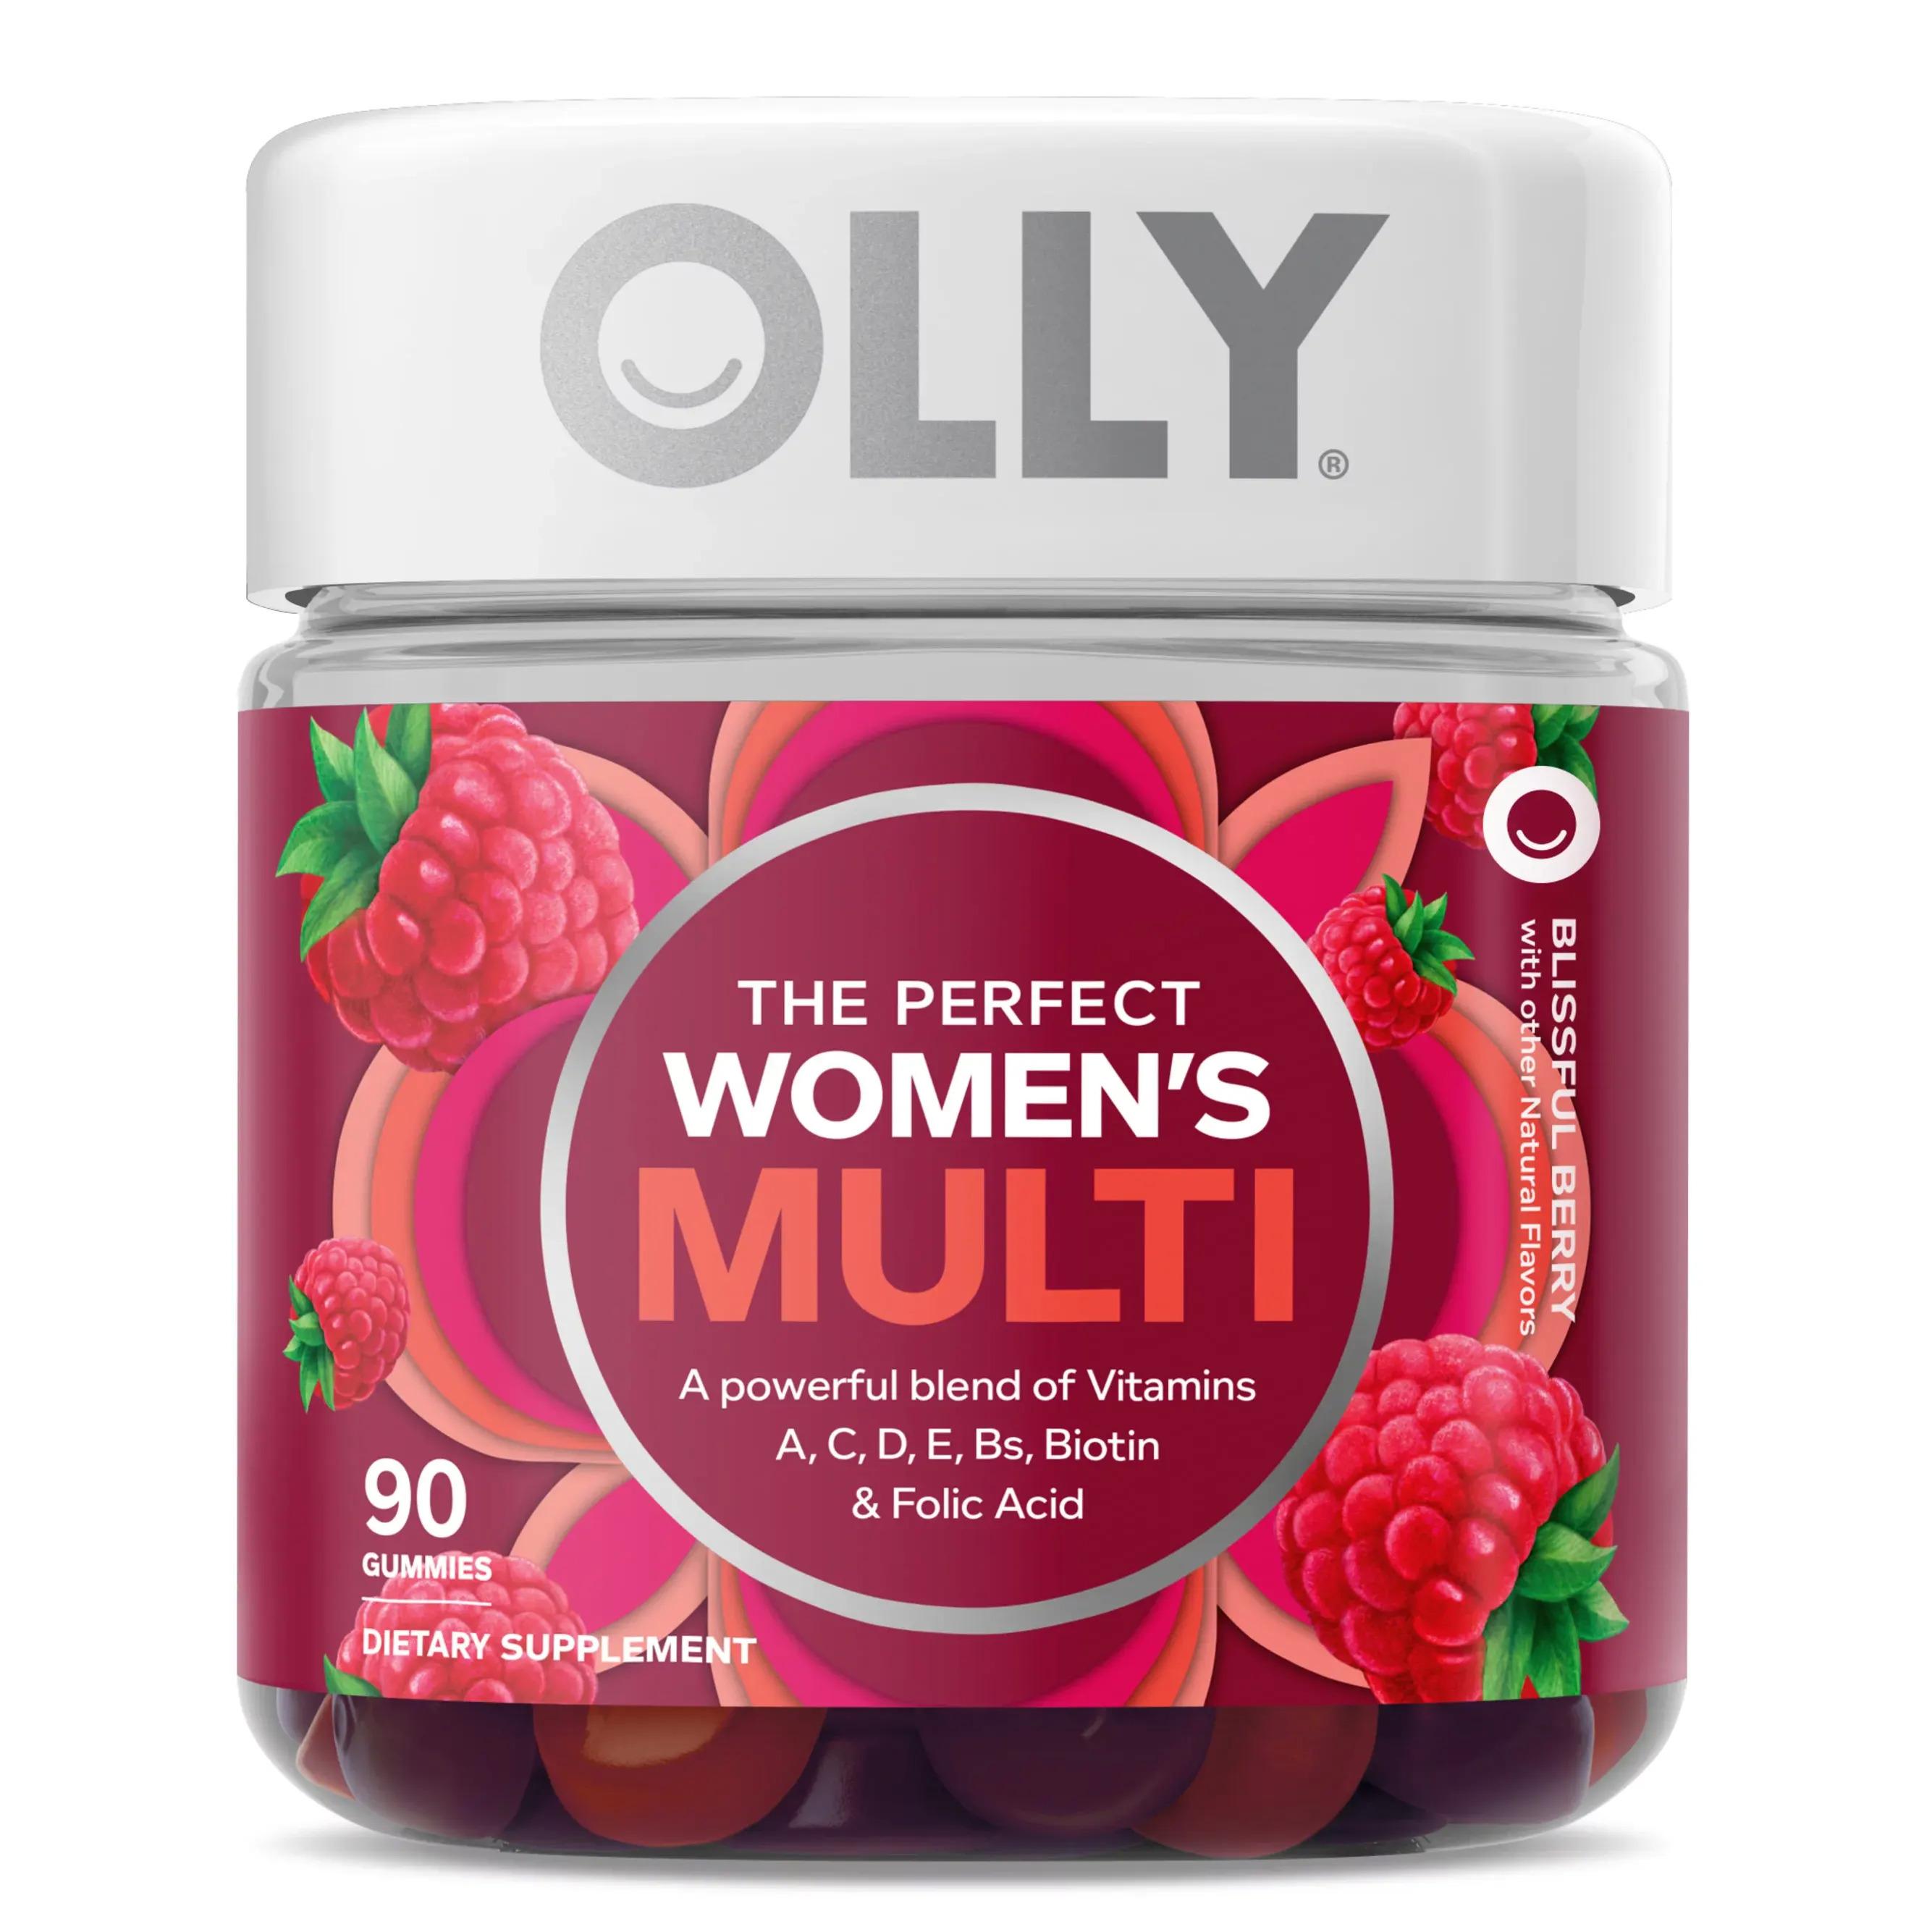 Free Olly Gummy Vitamins from Target